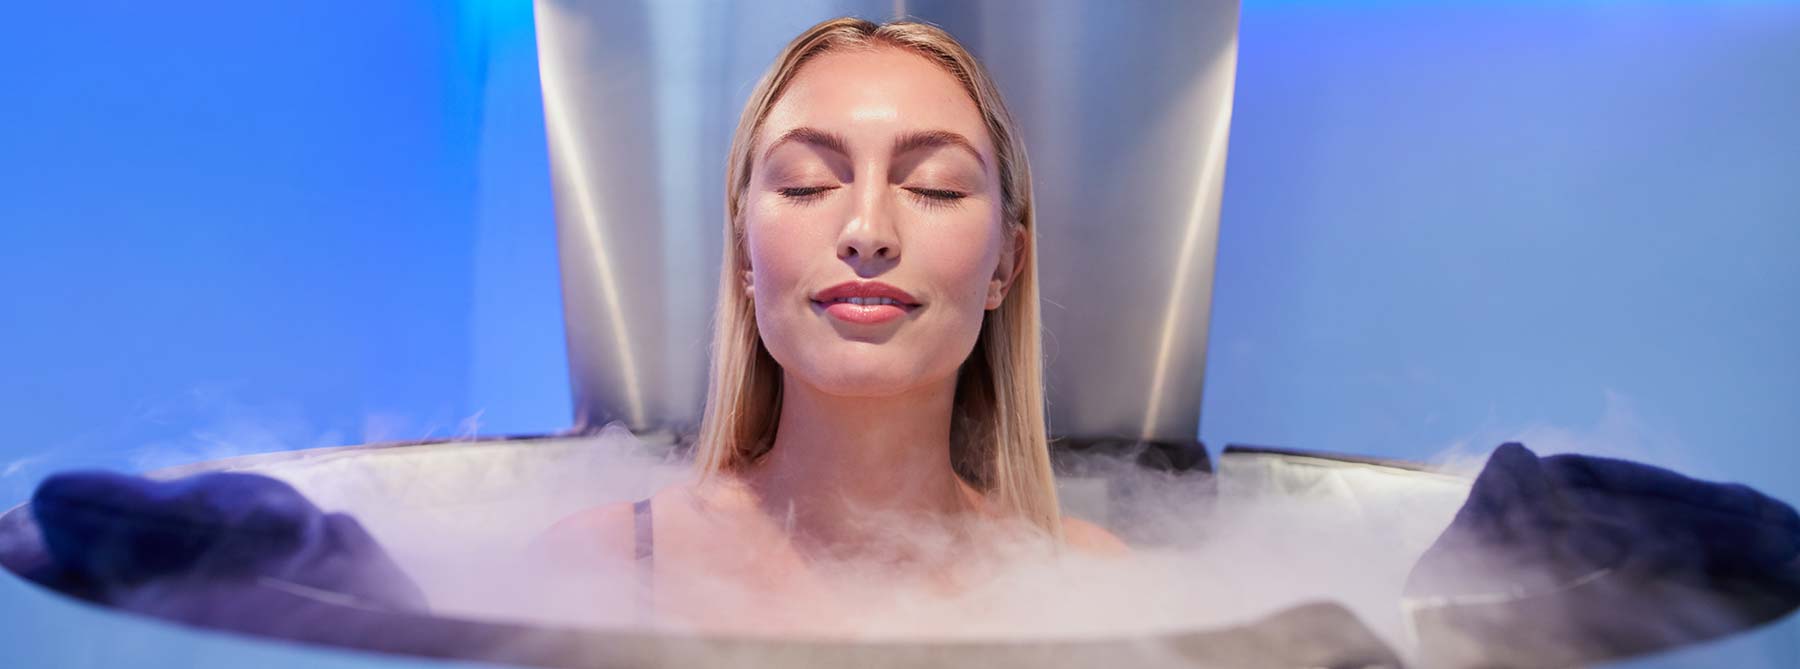 Benefits of Cryotherapy for Athletes